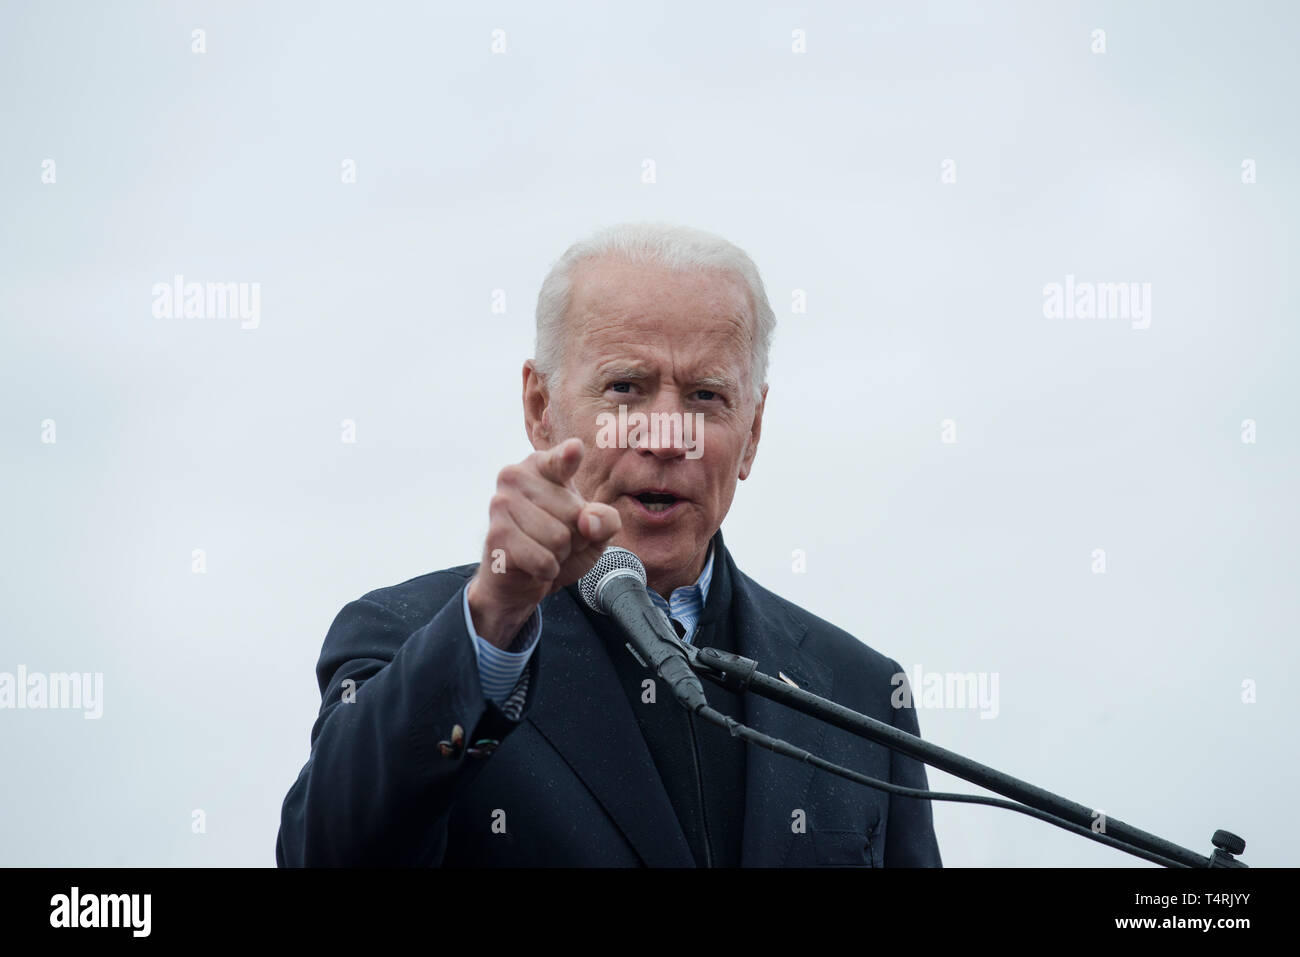 Dorchester, Massachusetts, USA. 18th April, 2019.  Former U.S. vice president and possible 2020 Democratic presidential candidate, Joe Biden, speaking to over 1,000 striking grocery store workers. Credit: Chuck Nacke/Alamy Live News Stock Photo